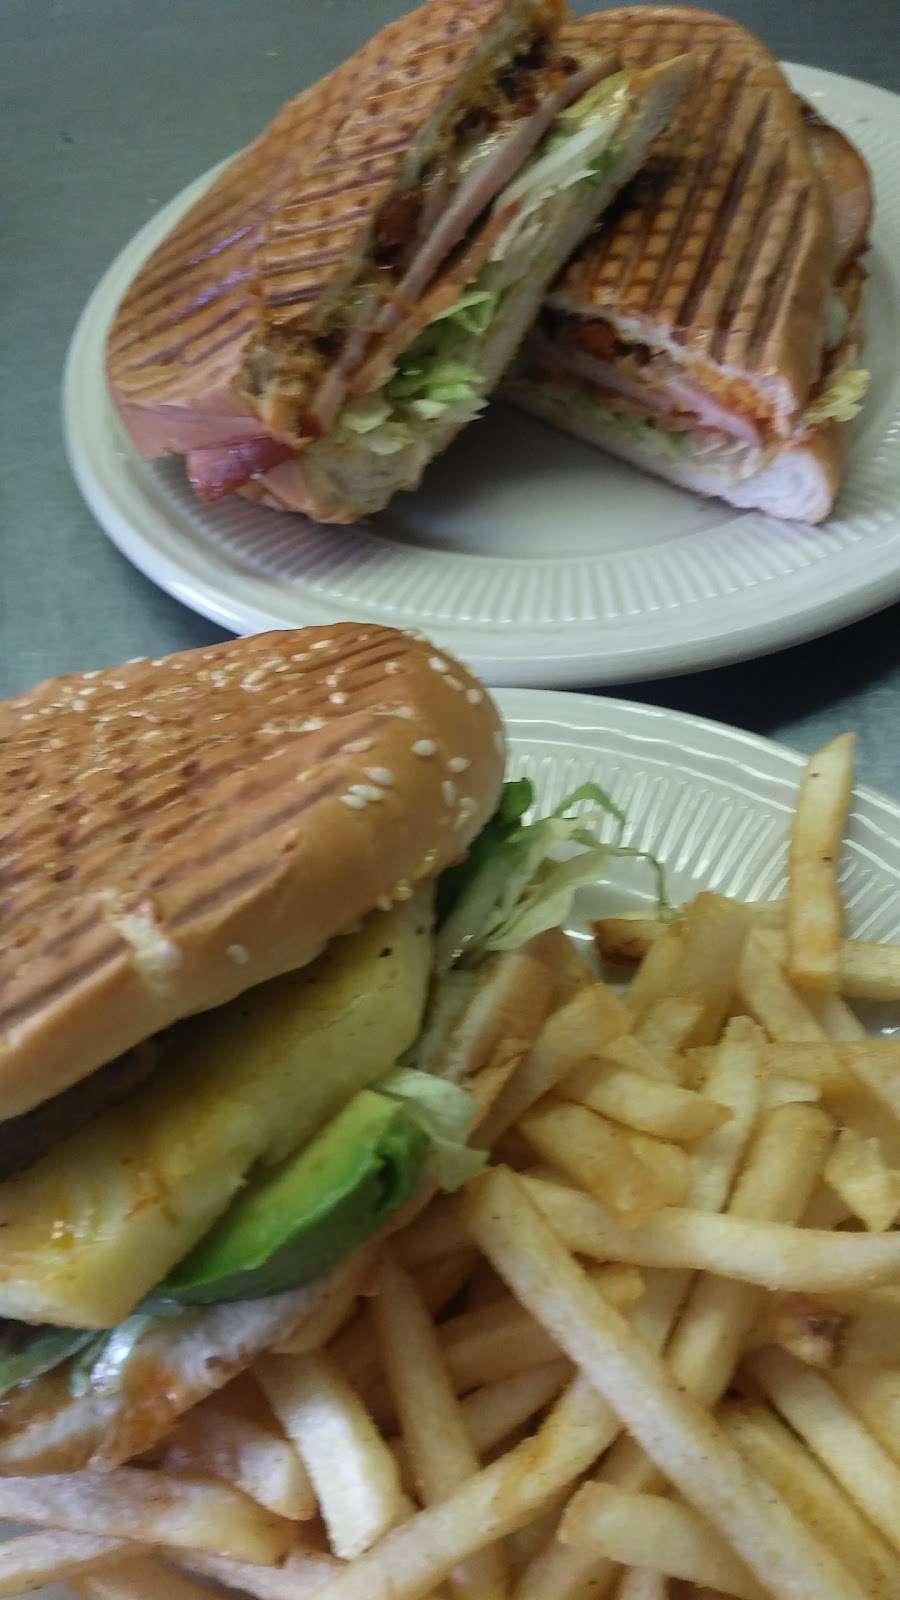 Tortas Deli and More | 30502 Misty Meadow Dr, Magnolia, TX 77354 | Phone: (281) 259-8414